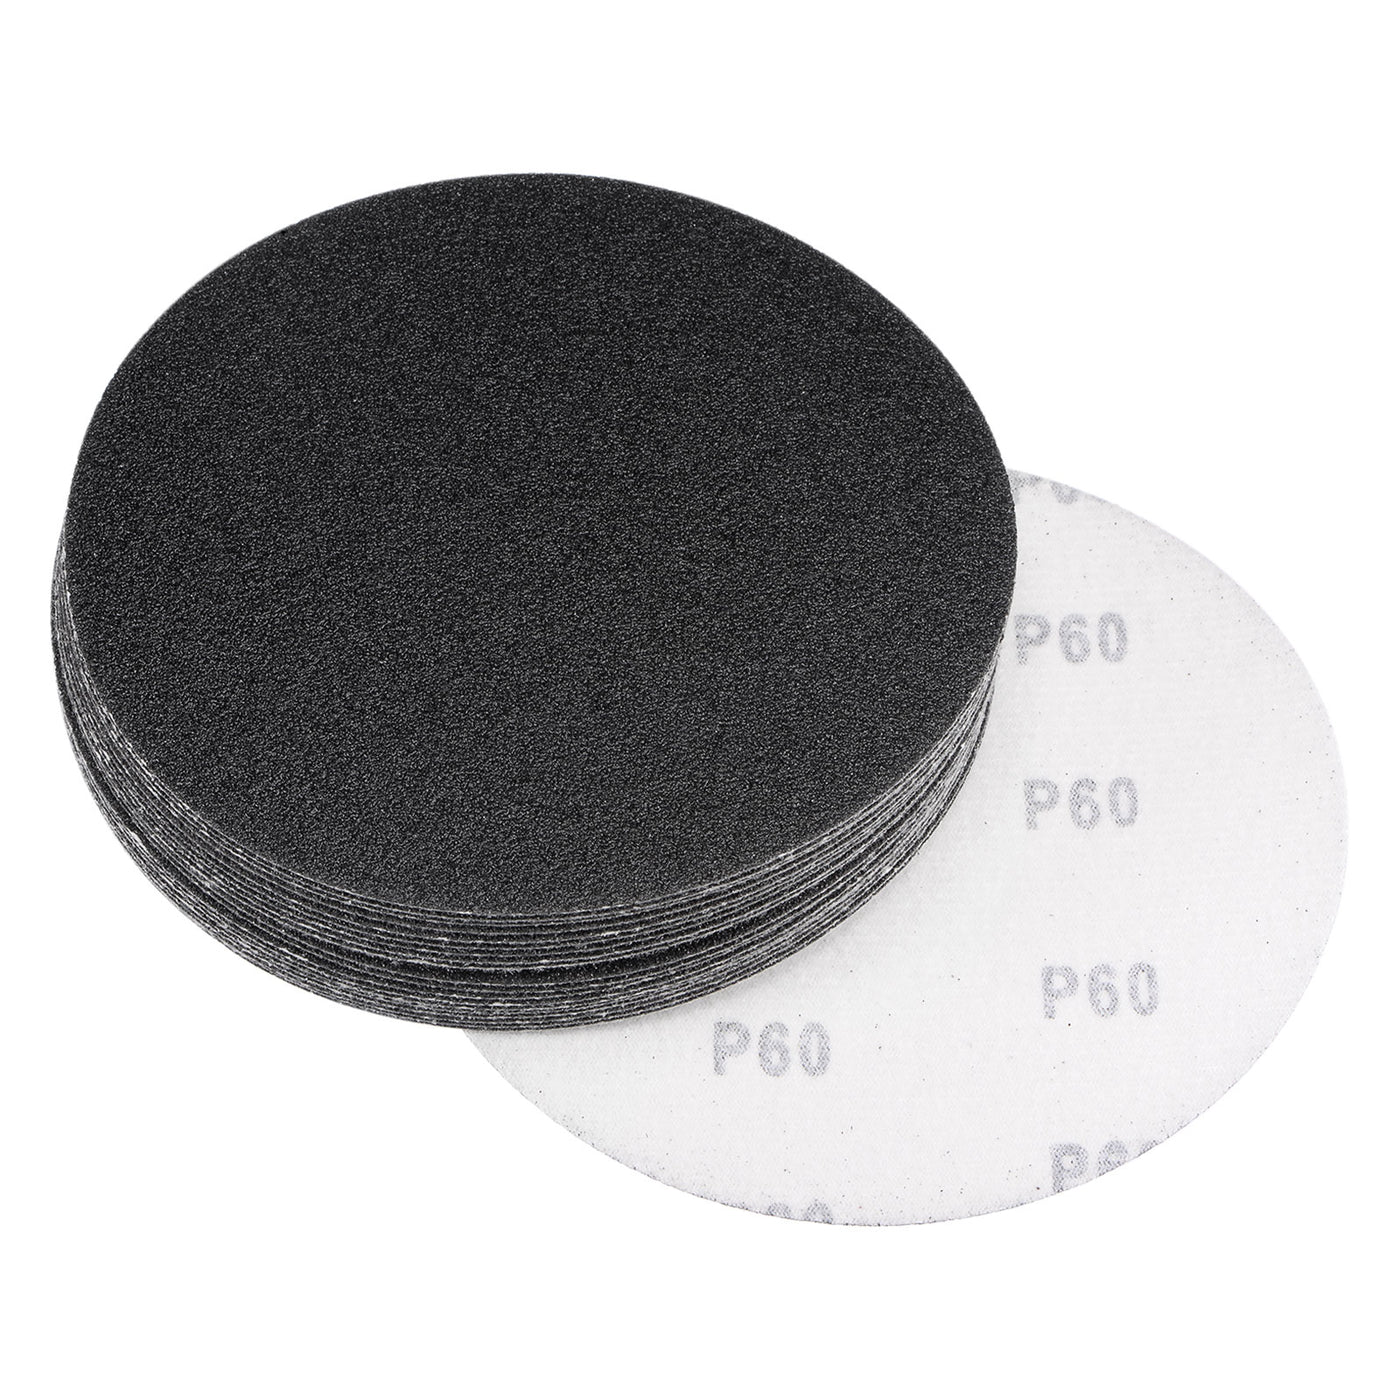 Uxcell Uxcell 6 Inch Sanding Disc 60Grit Hook and Loop Silicon Carbide C-Weight Backing 20Pcs